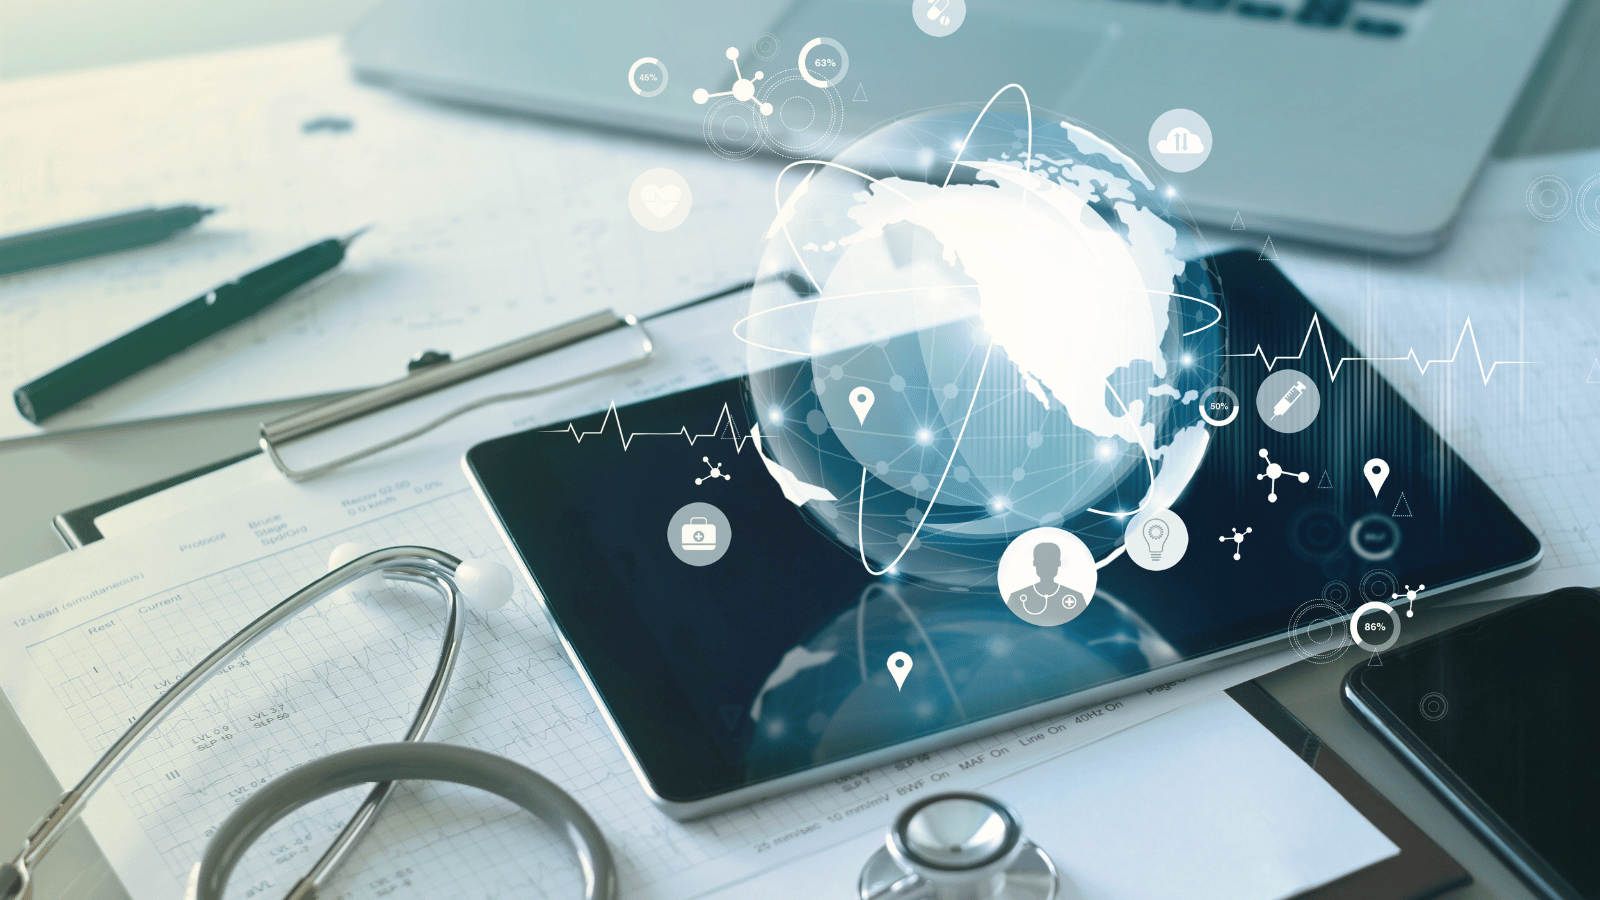 AI and Digital Technology Opportunities in Healthcare